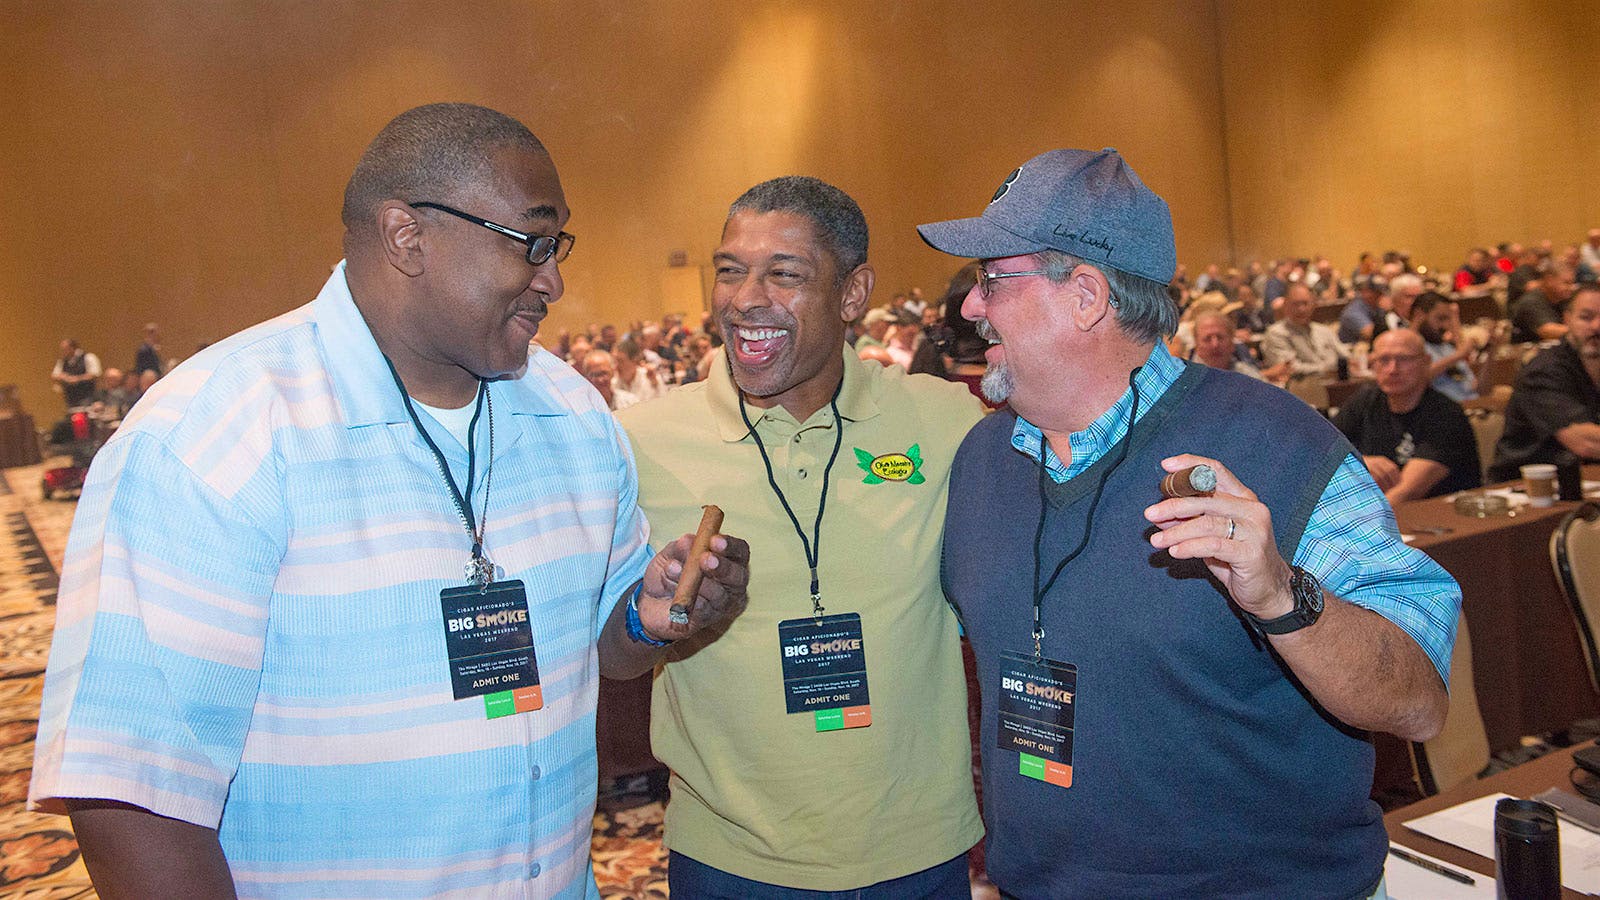 Walter Frazier, Ted Hughes and David Boggs share a laugh in between seminars.